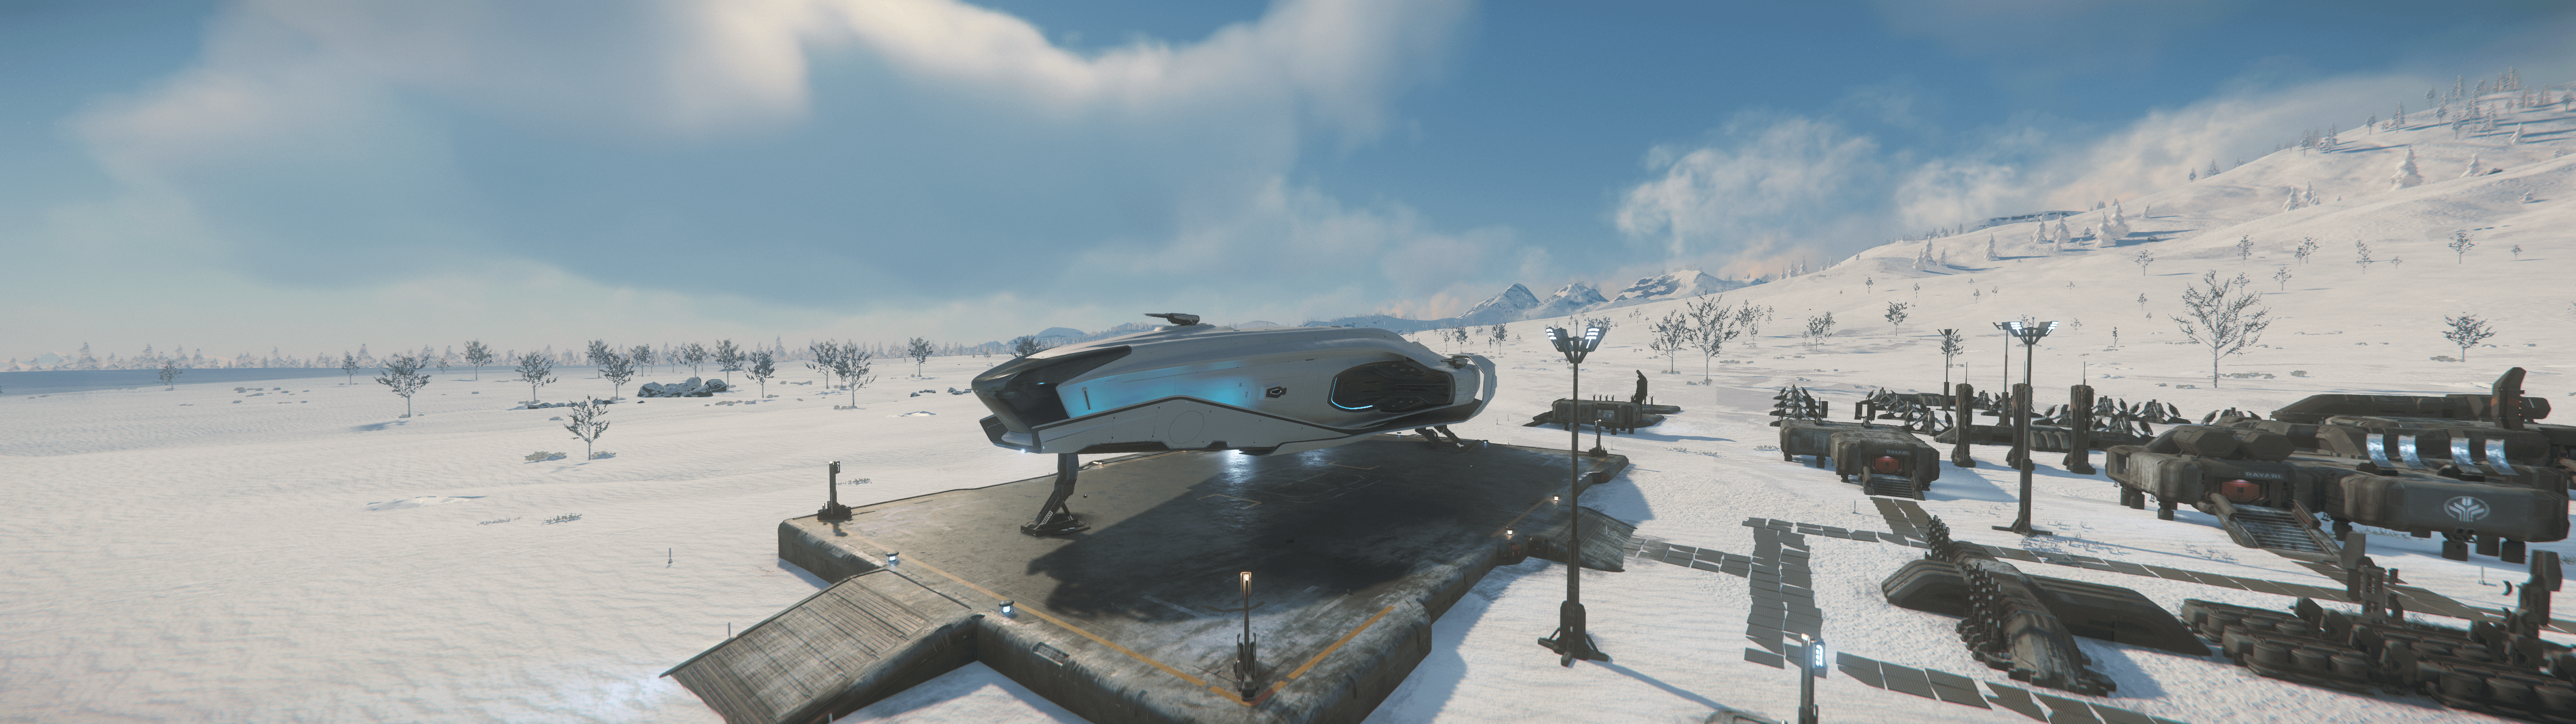 A ship lands on a snowy platform in a game scene. - 5120x1440